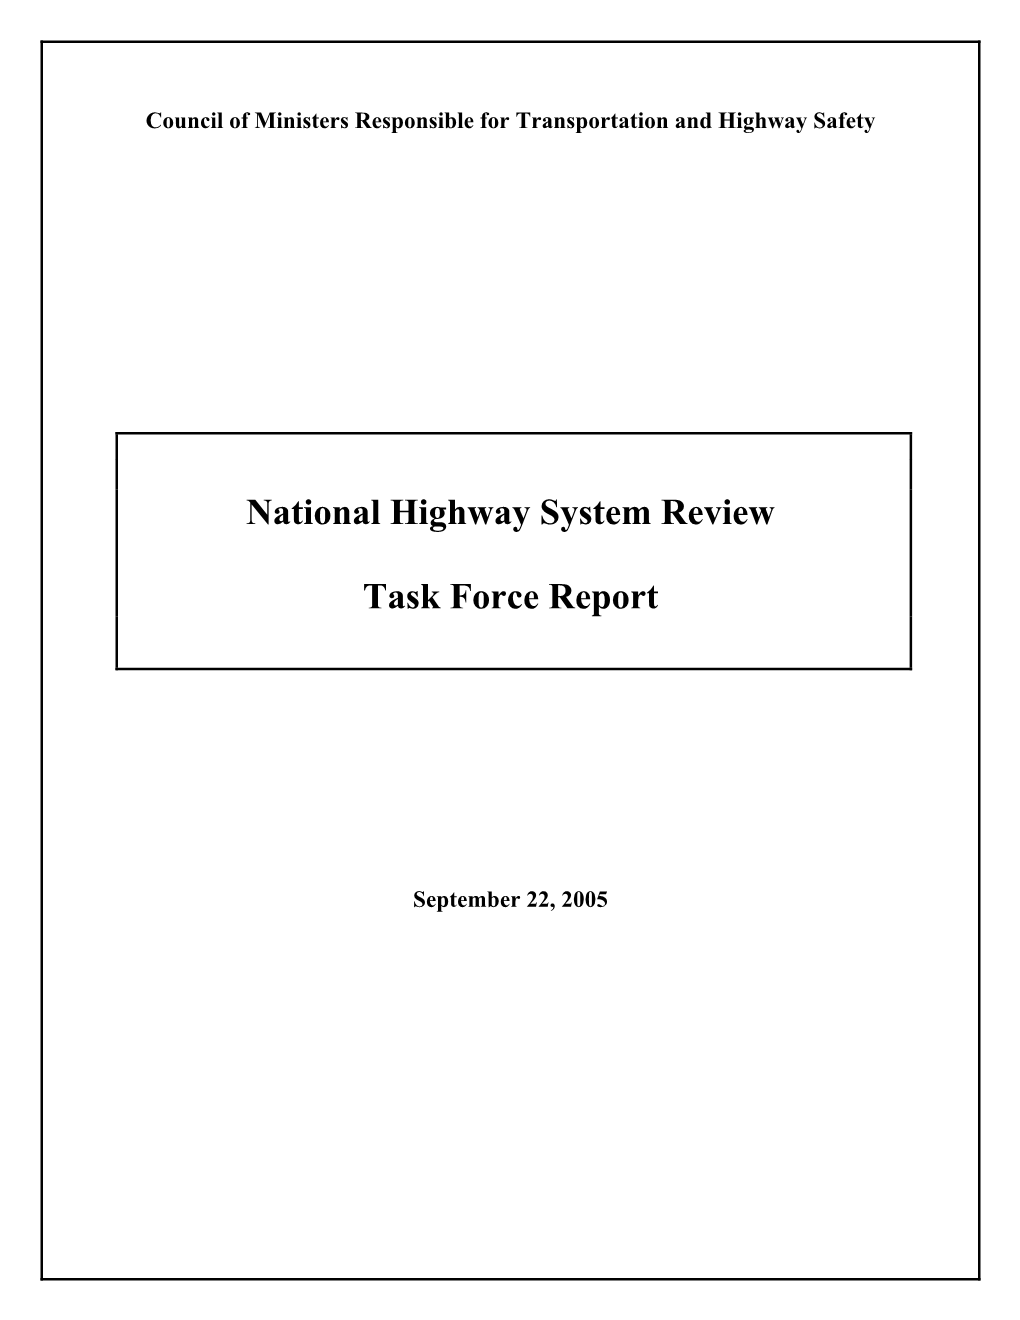 National Highway System Review Task Force Report